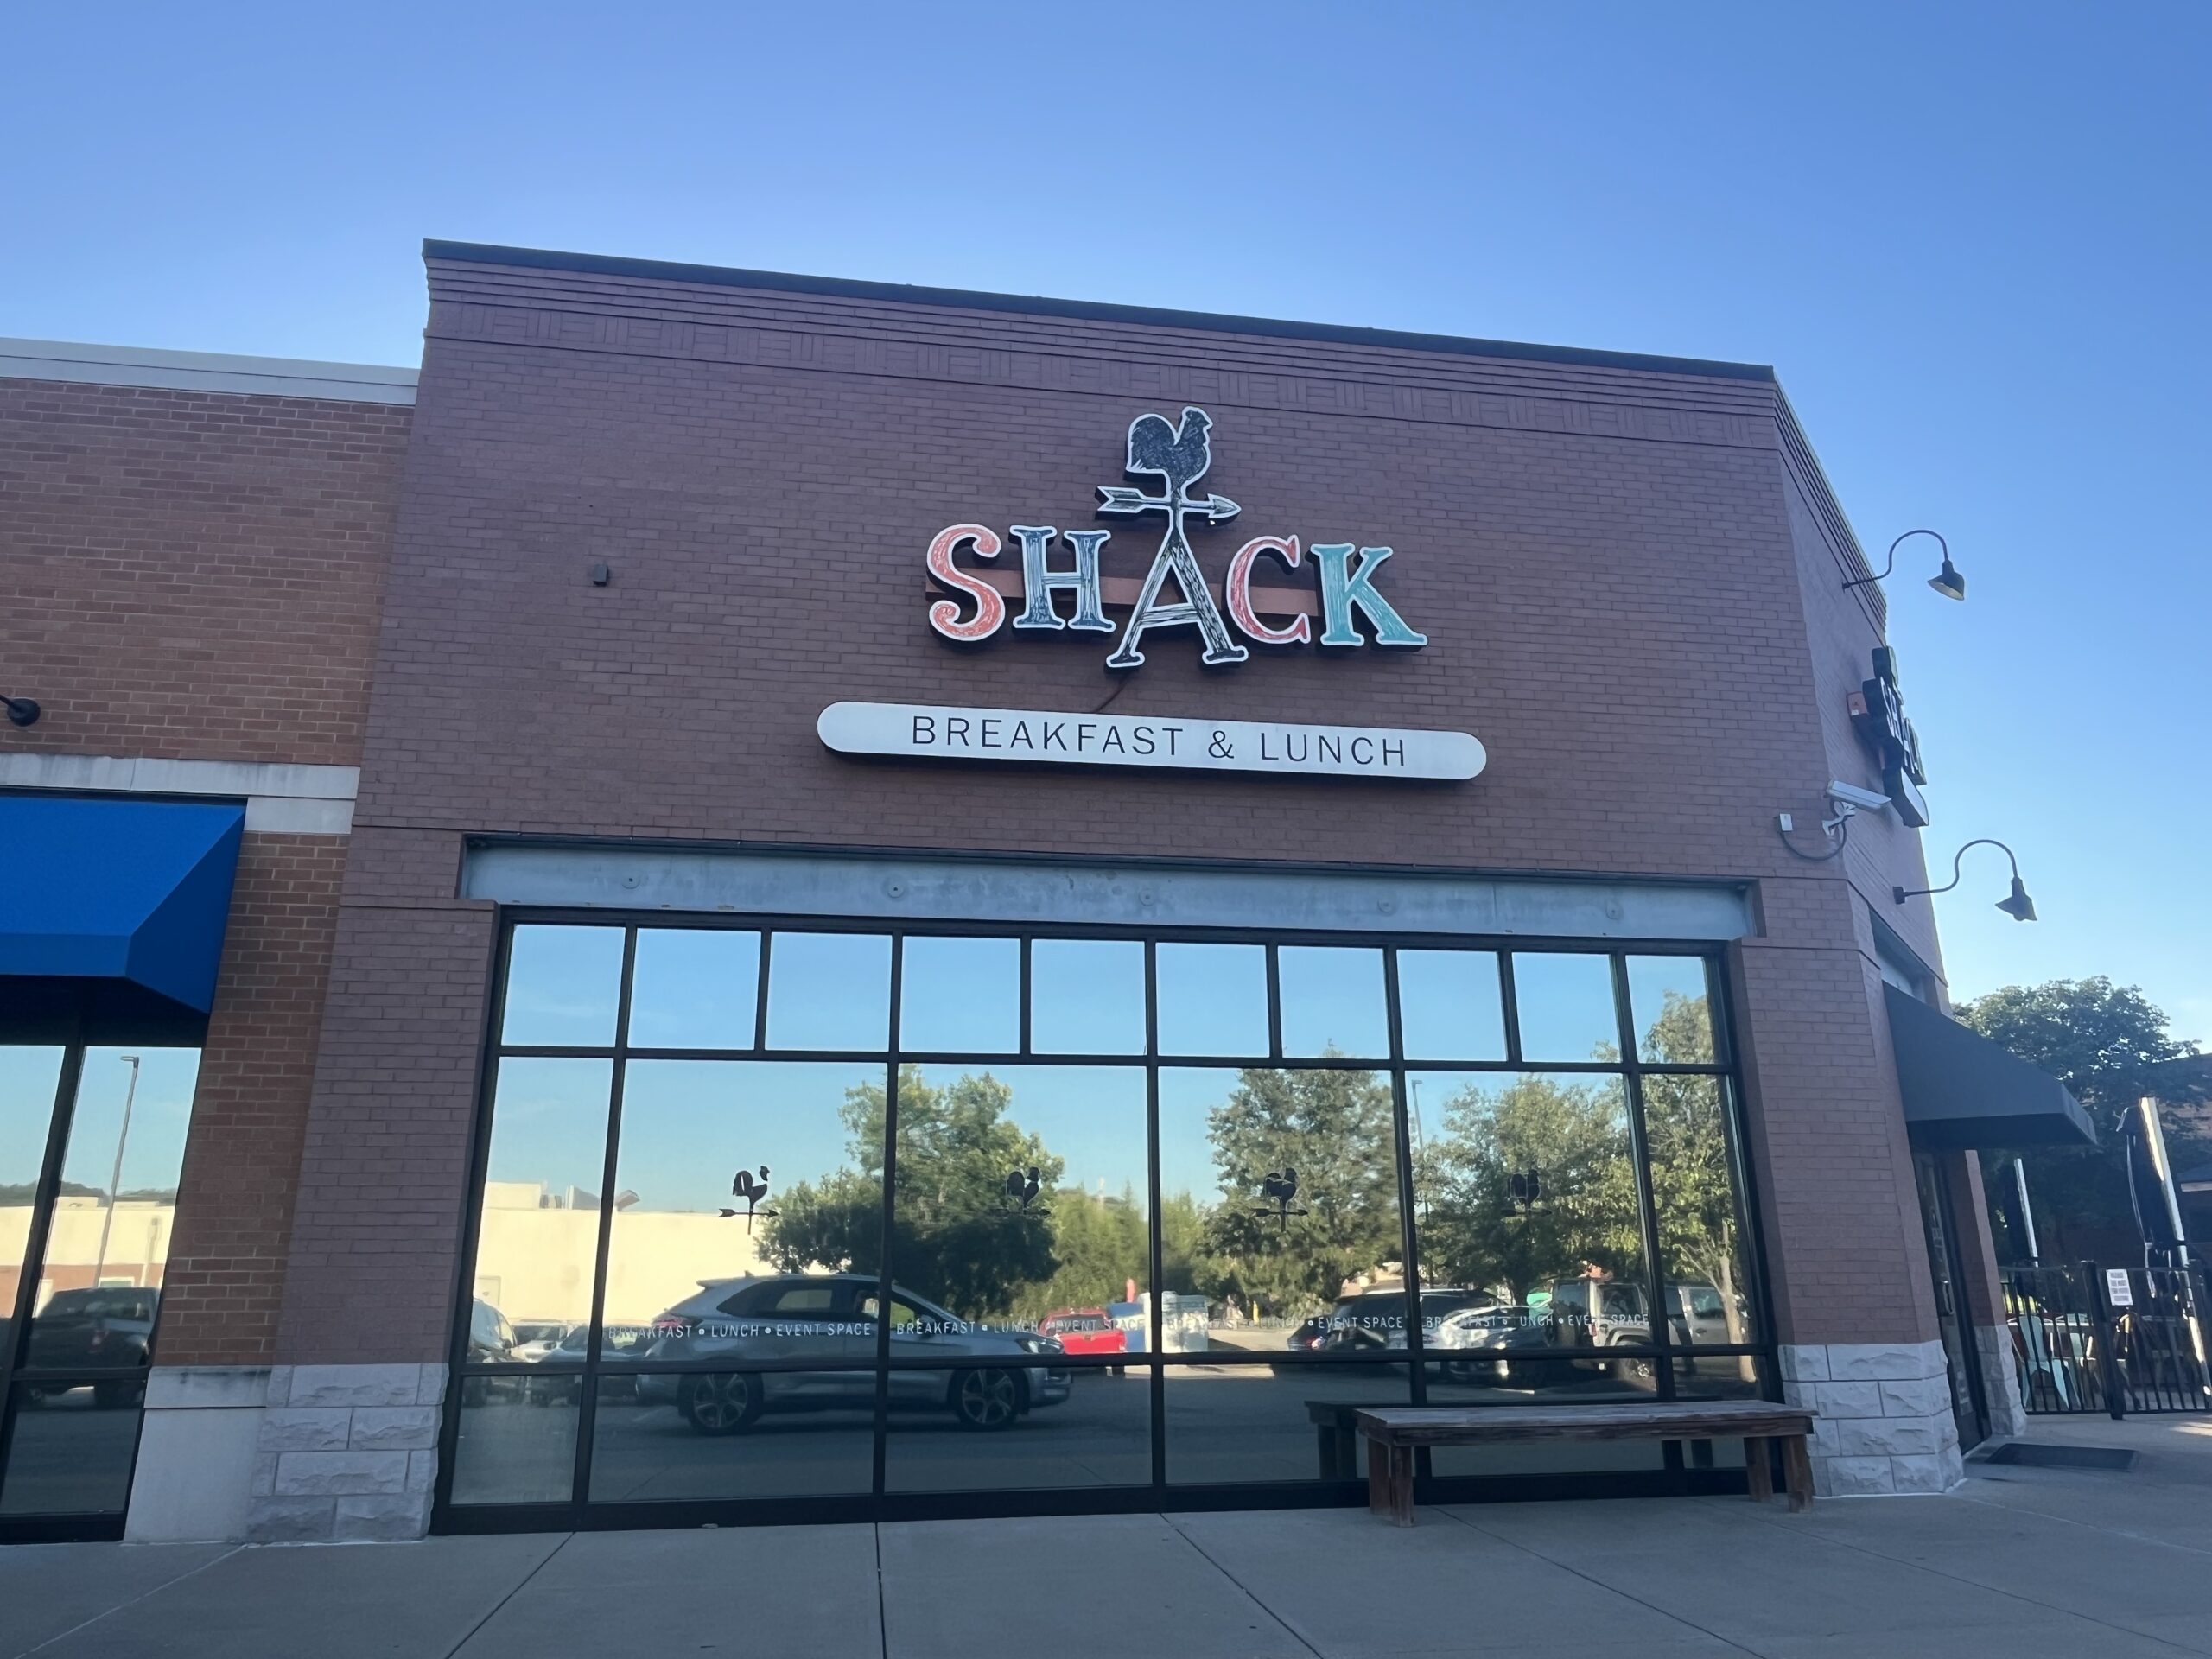 Shack Breakfast & Lunch Added to Directory